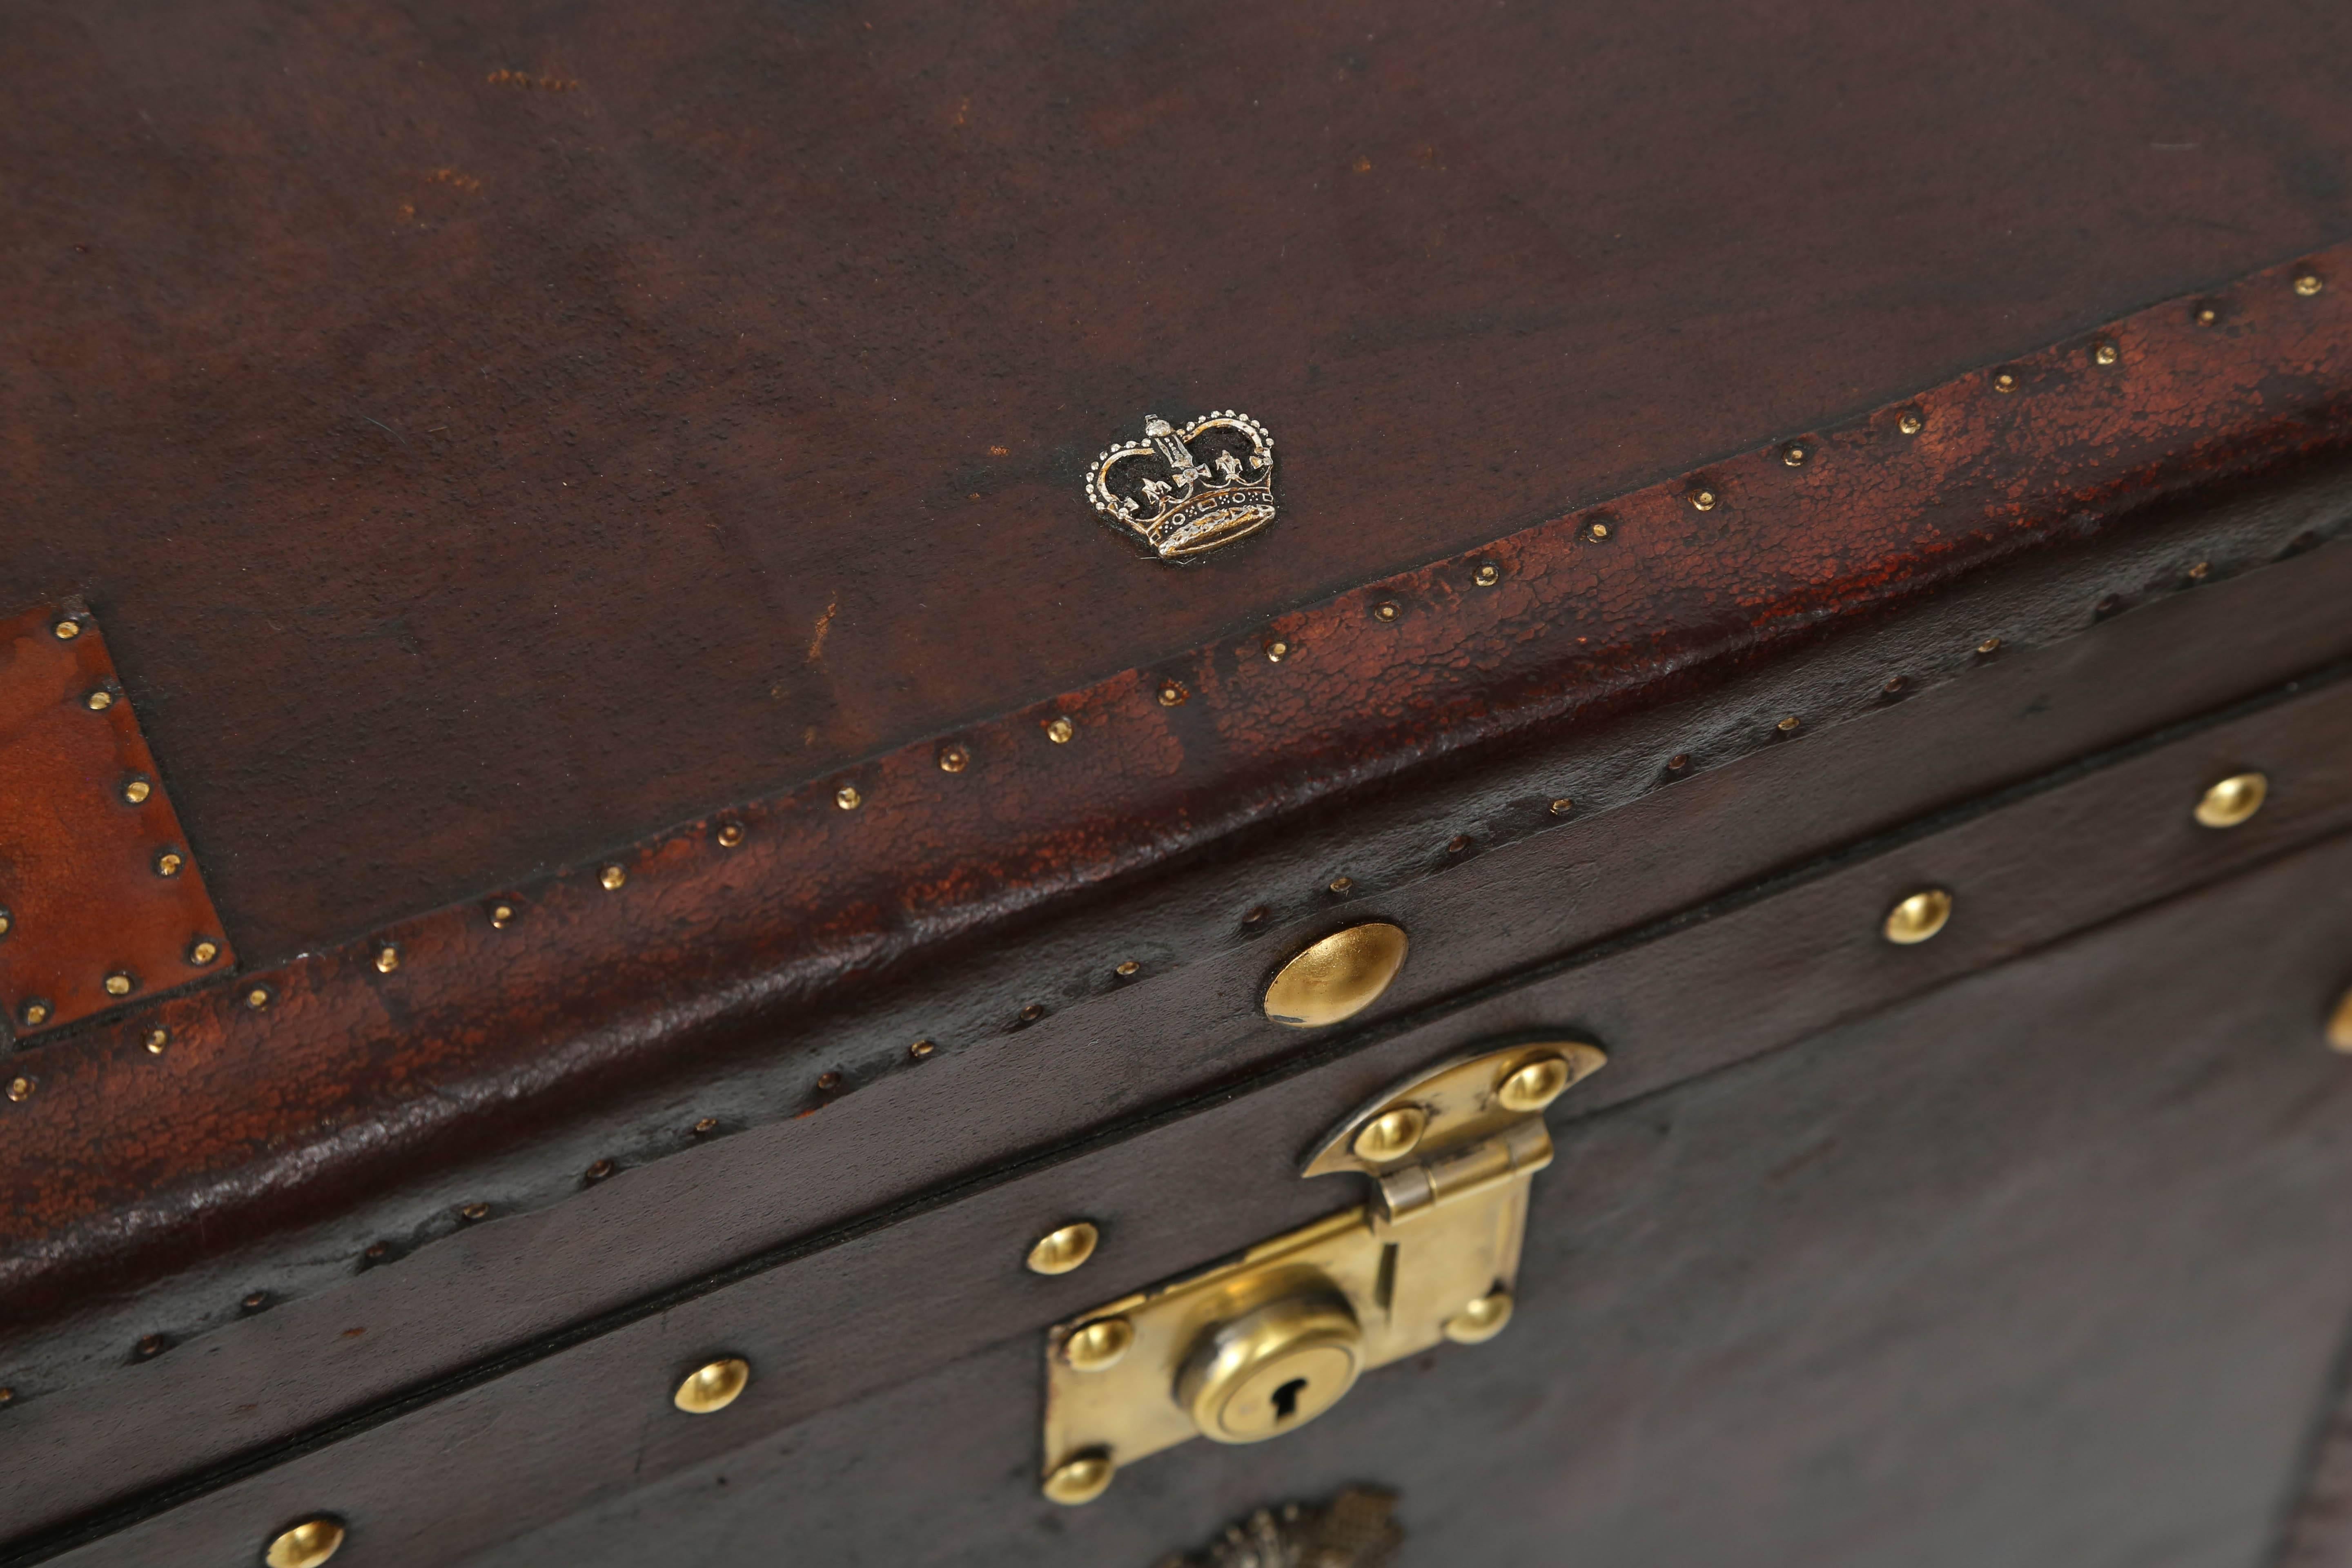 This handsome pair of leather-bound storage trunks were recently purchased in London and have been professionally restored. The leather is a dark brown and the hardware a warm-colored brass. There are armorial-type mounts in a silver-toned metal